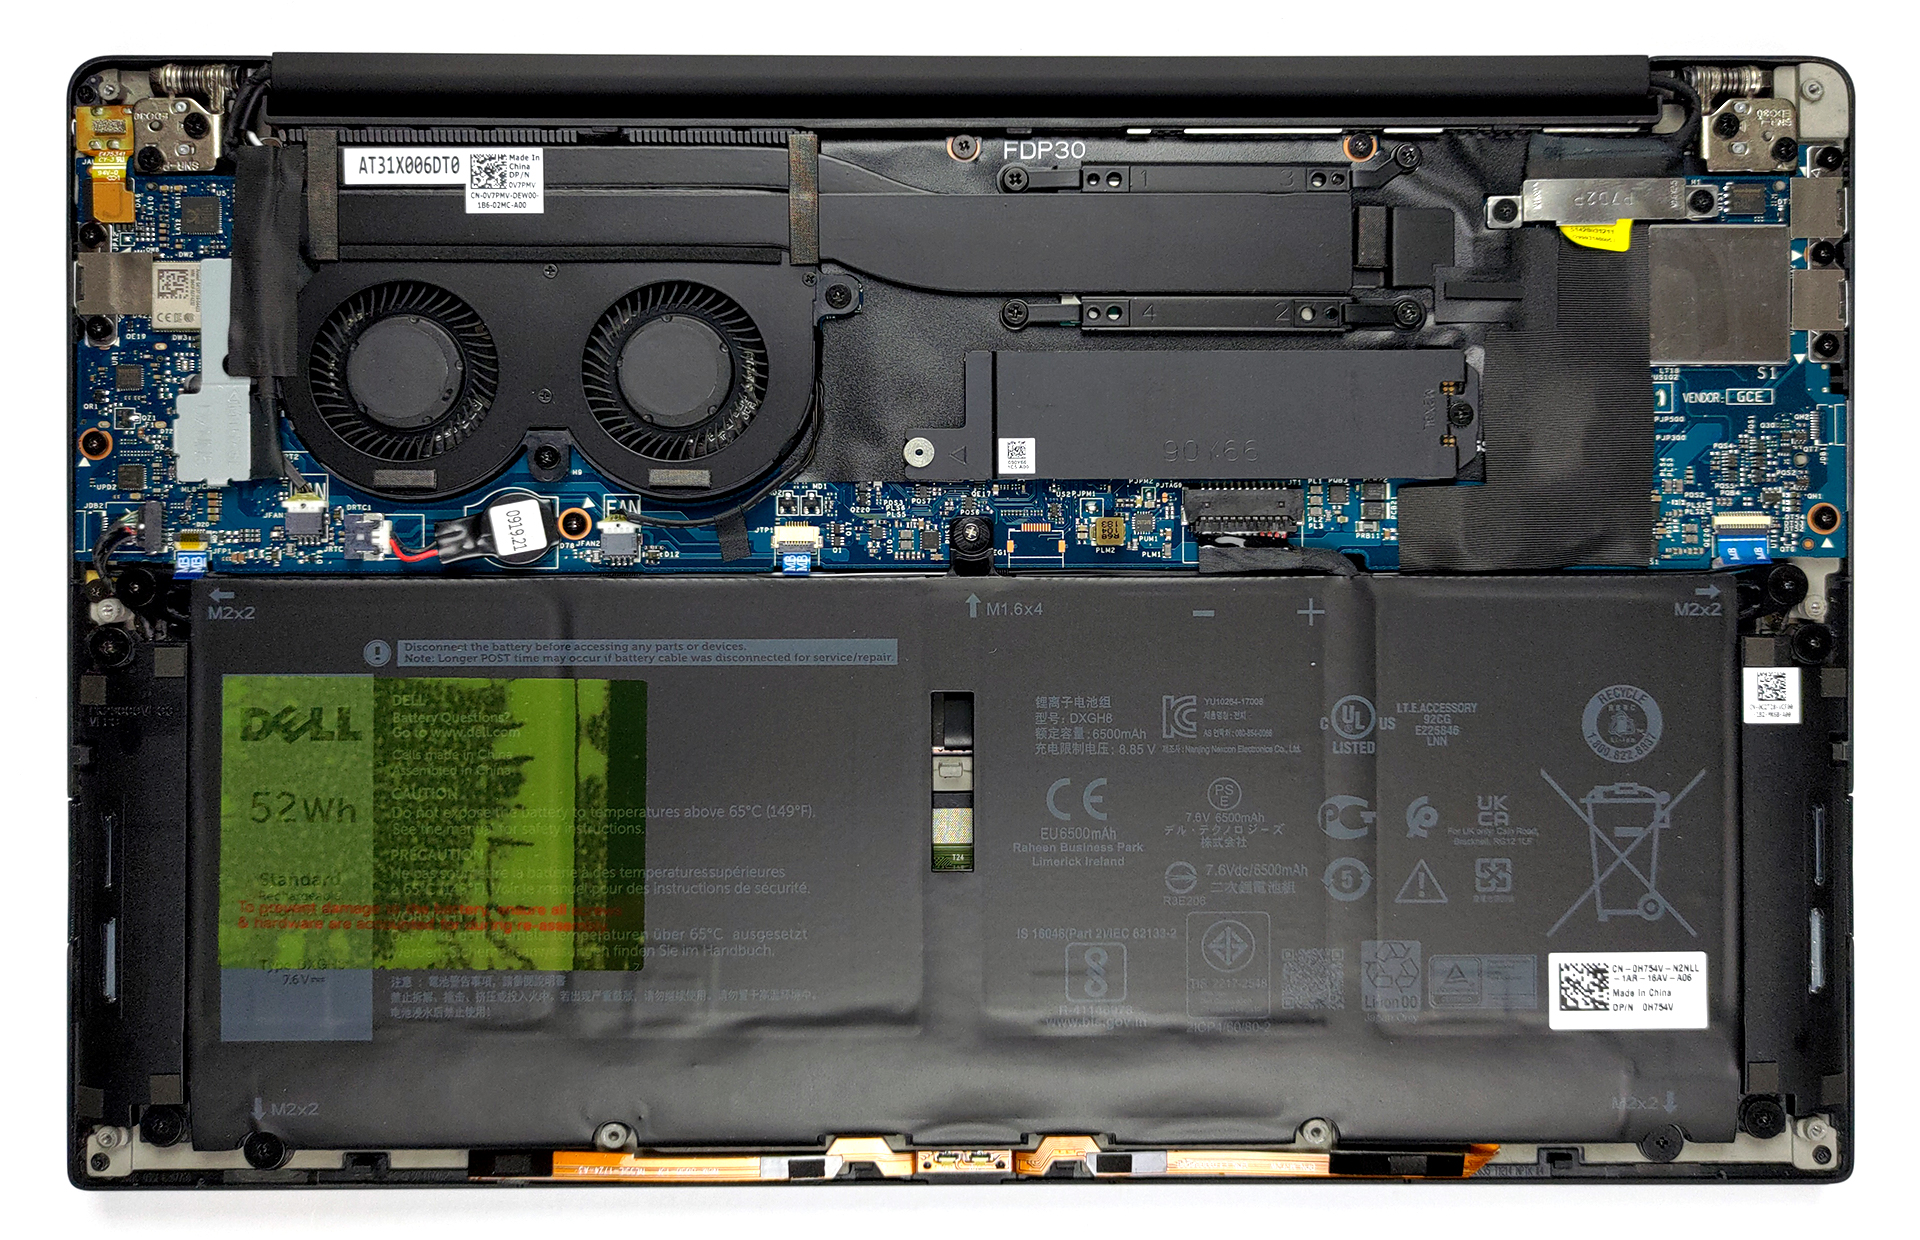 Inside Dell 13 disassembly and upgrade options | LaptopMedia.com